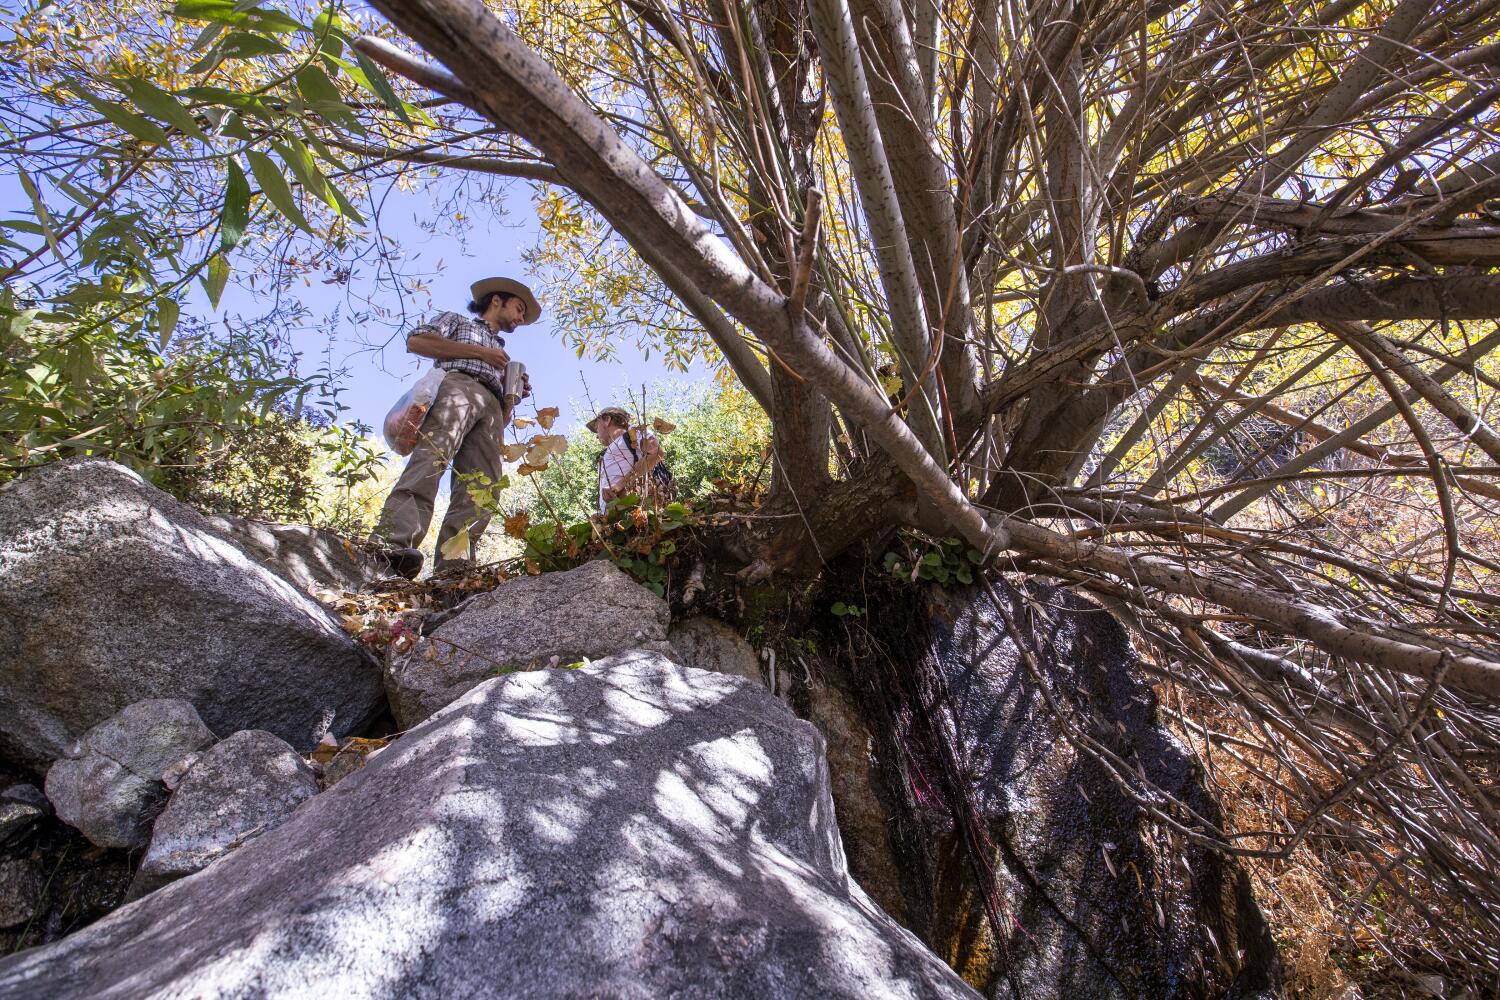 Under a temporary mining ban, 4 rare plant species can bloom in San Bernardino forest